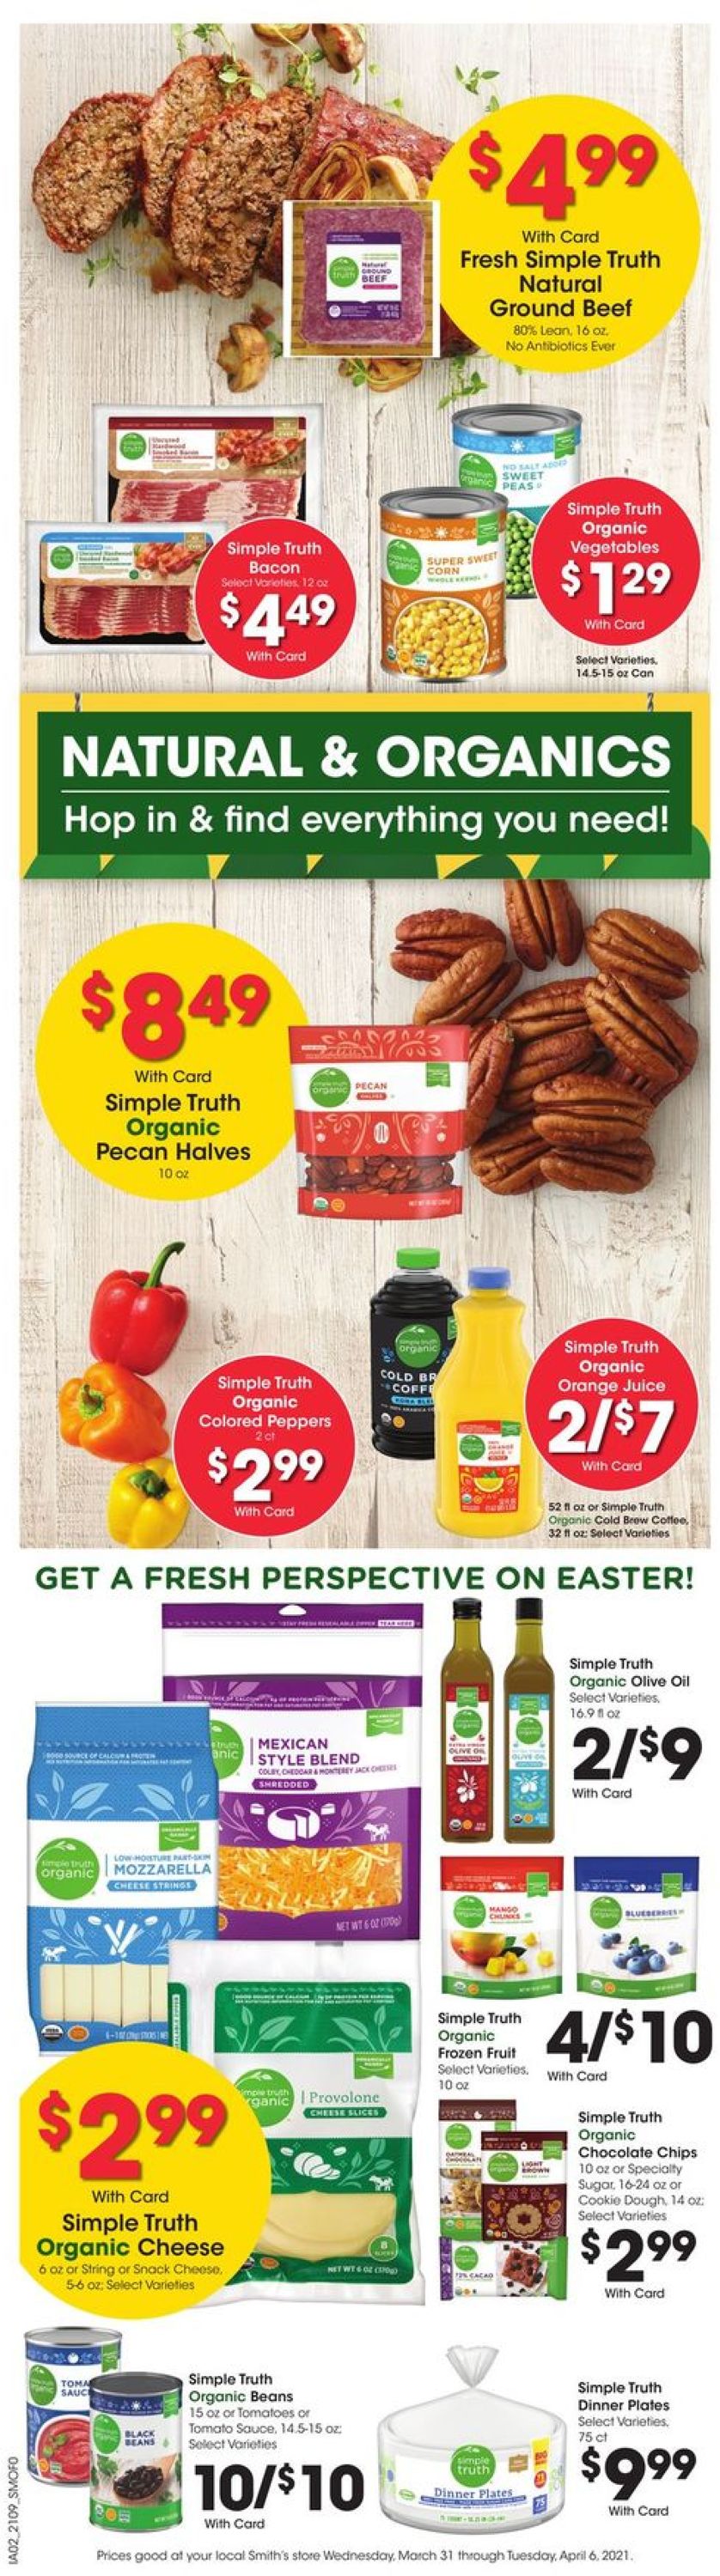 Smith's - Easter 2021 Ad Weekly Ad Circular - valid 03/31-04/06/2021 (Page 7)